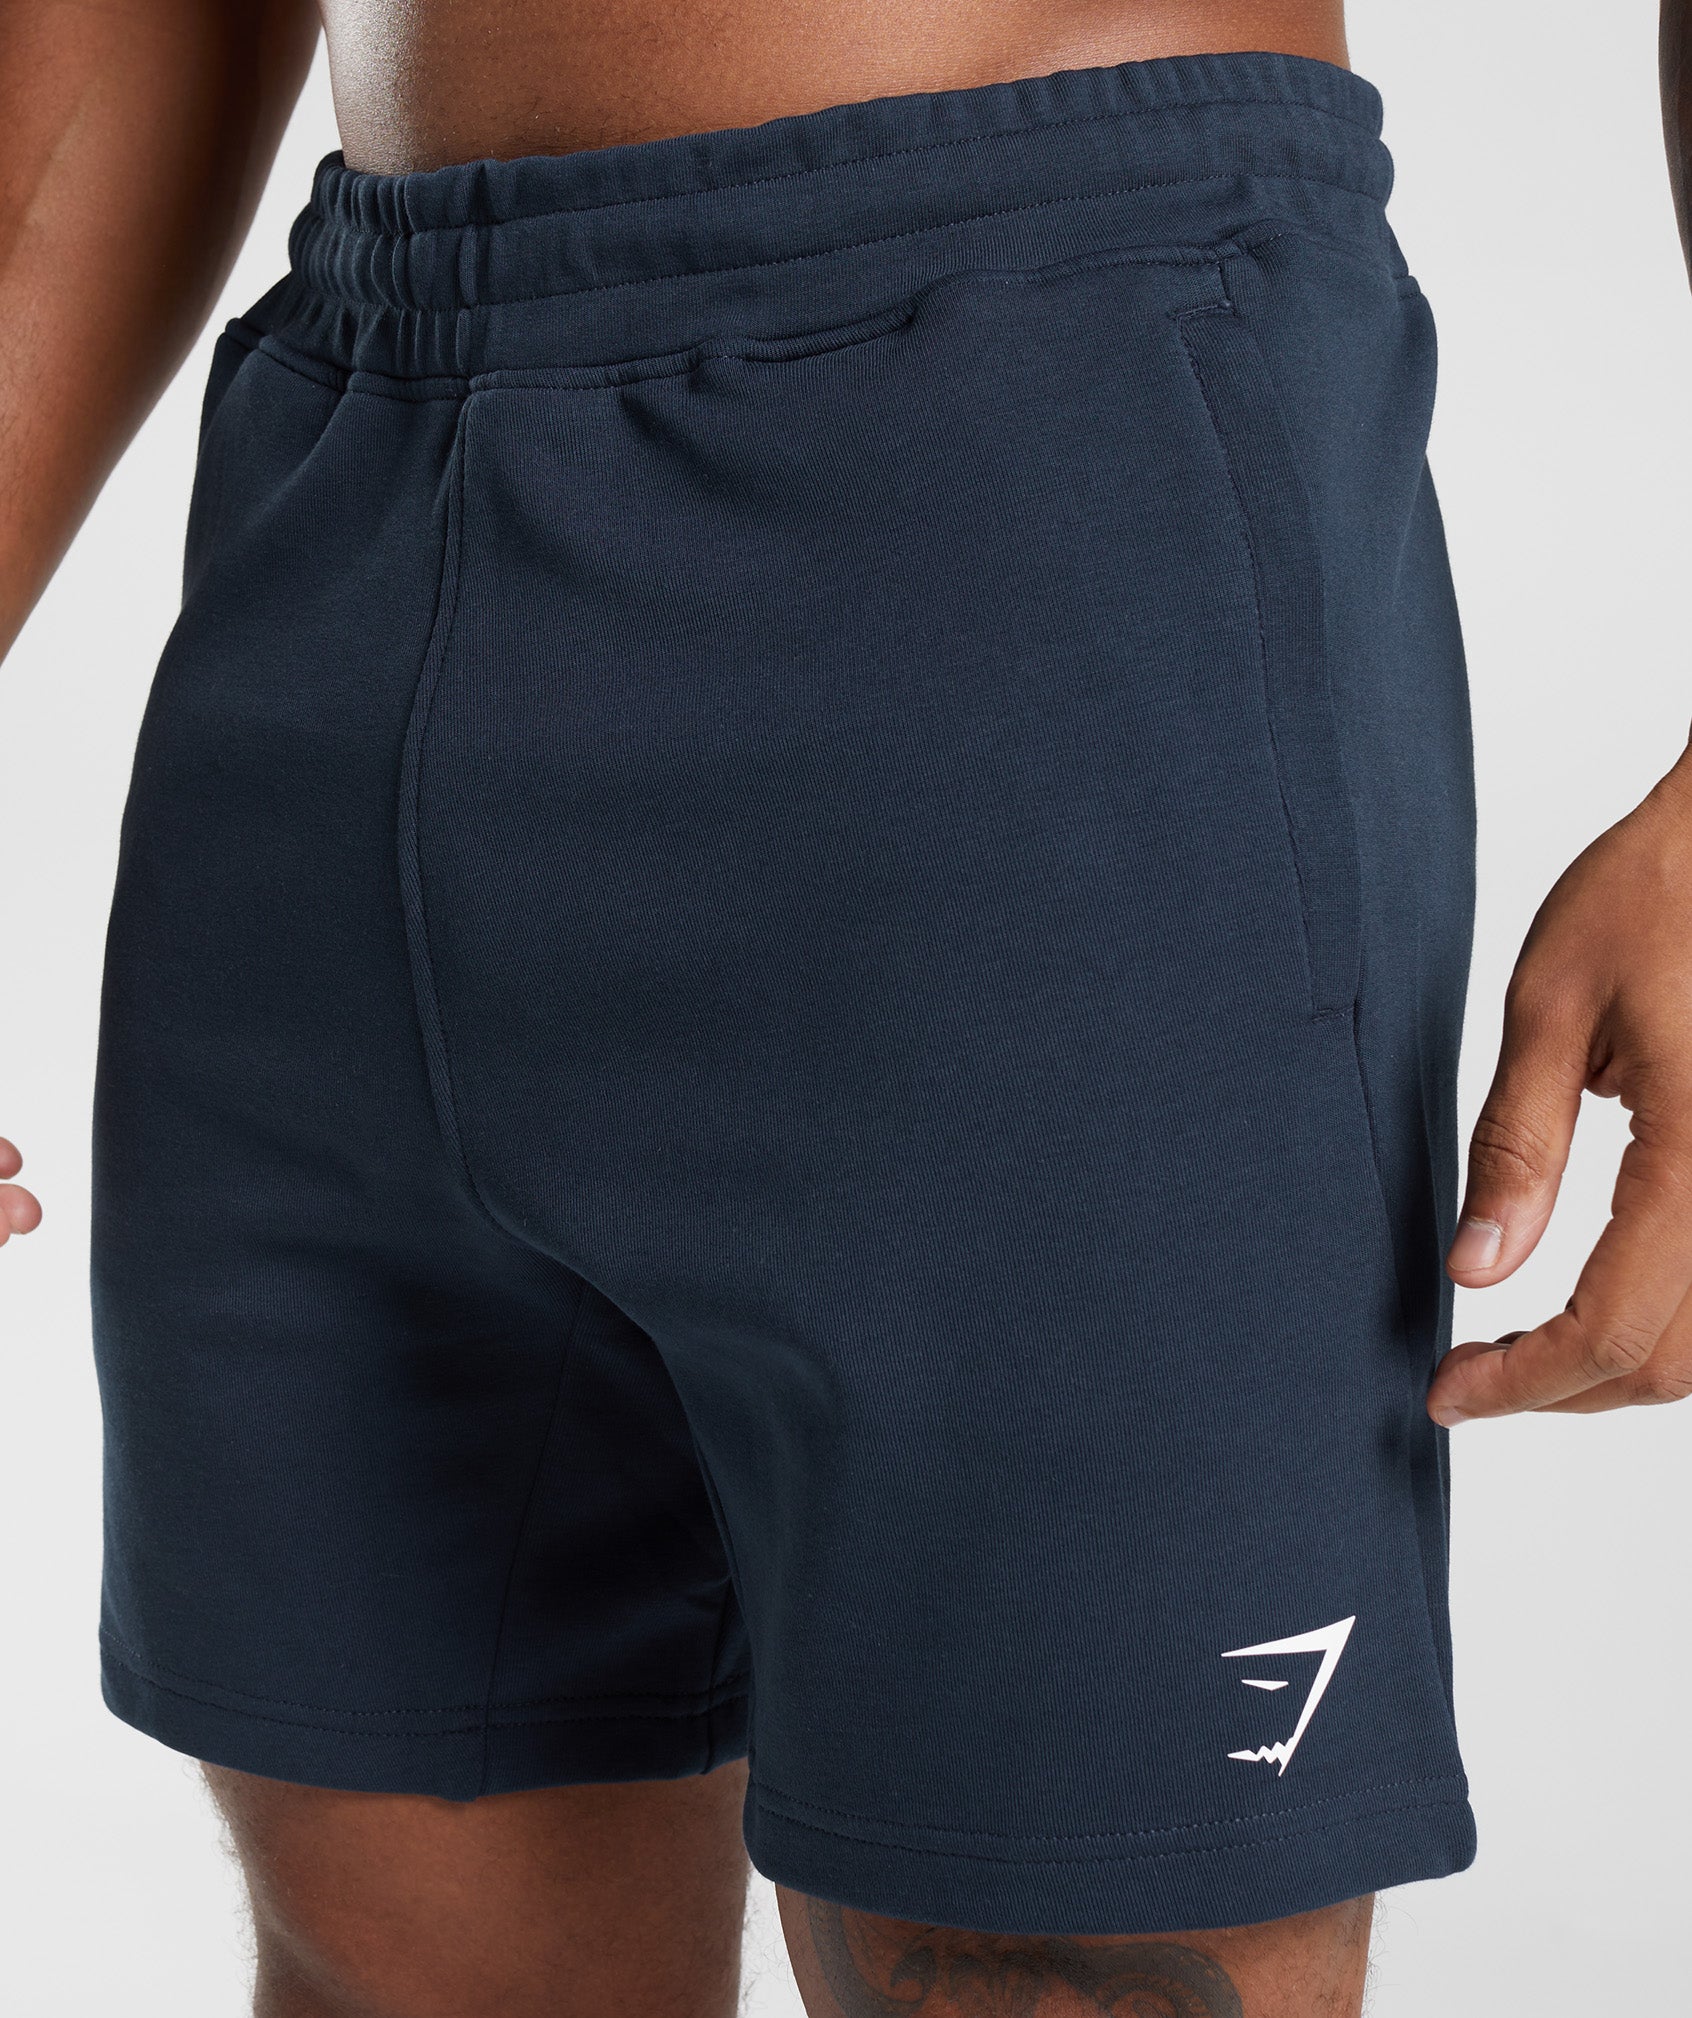 React 7" Shorts in Navy - view 5